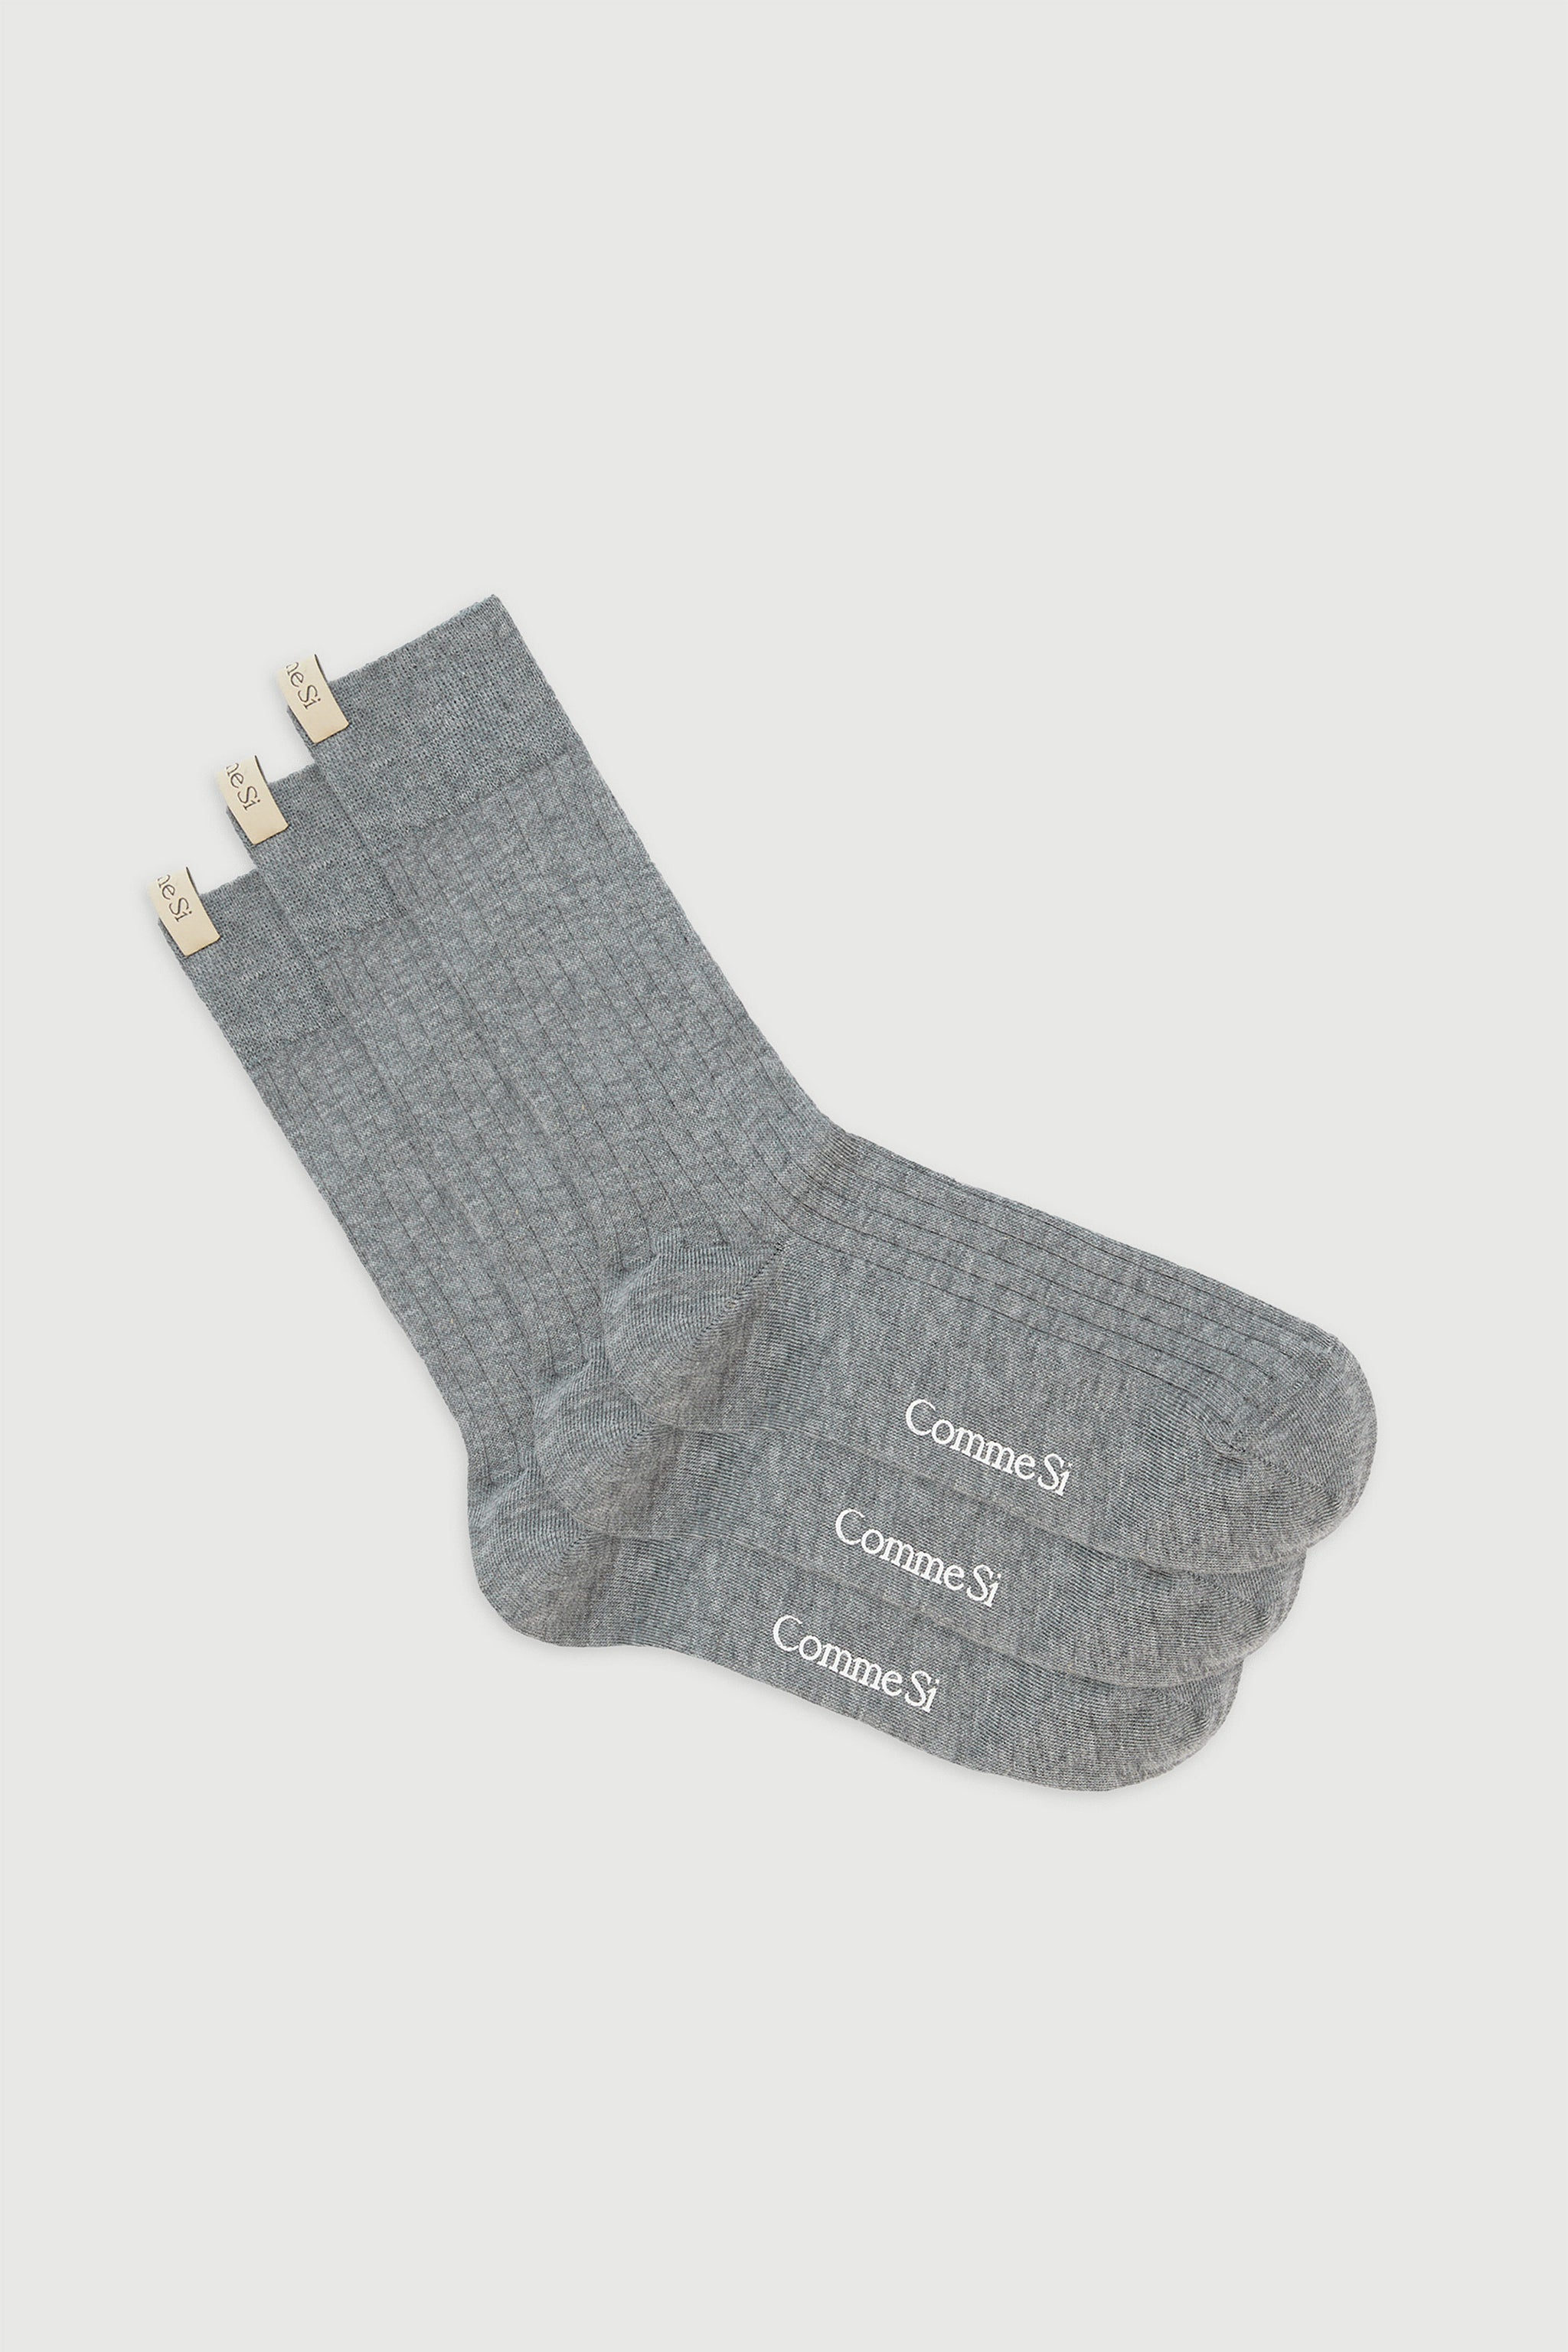 The Yves Sock Trio in Neutral, Egyptian Cotton, by Comme Si, three pairs of grey socks